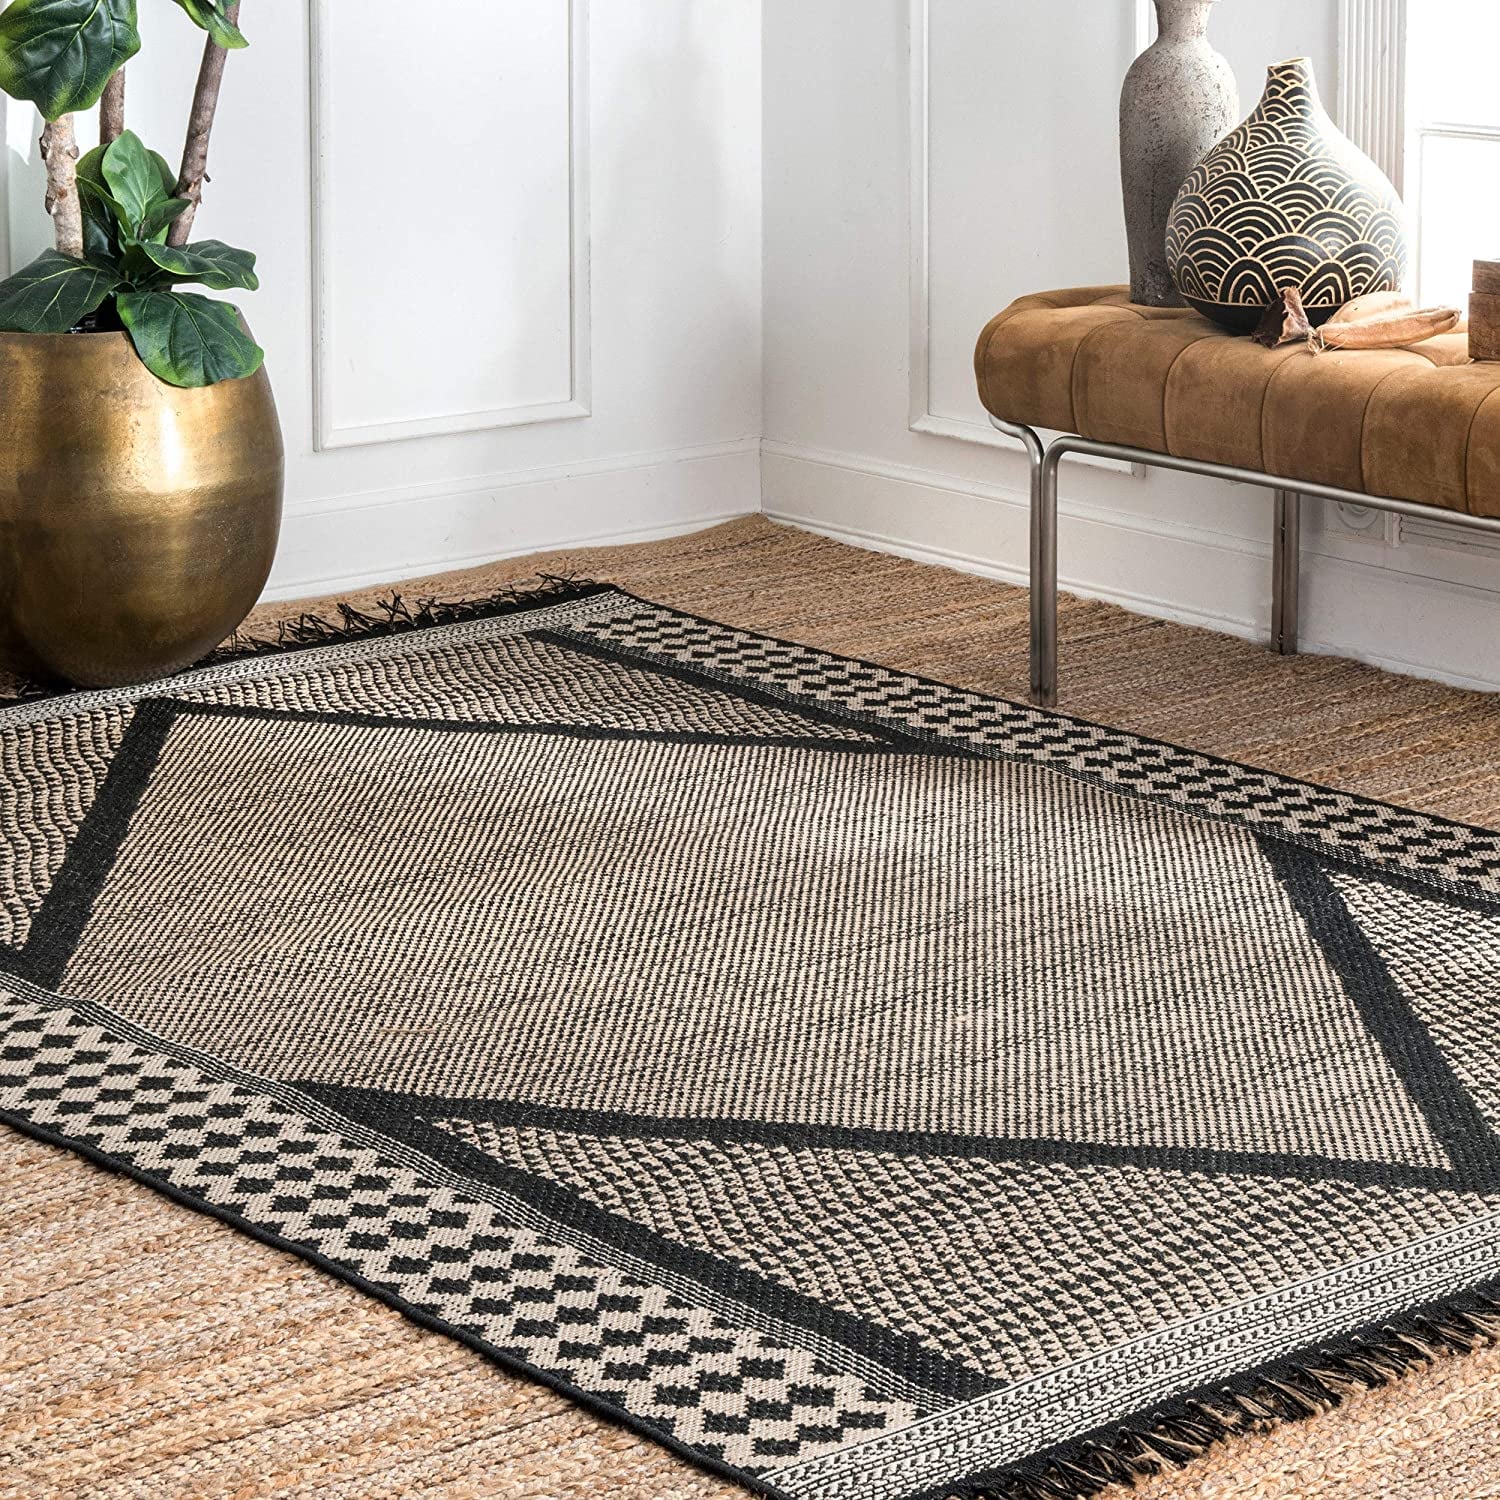 Uphome Indoor Outdoor Rug 5' x 7' Black and White Farmhouse Patio Rug Boho Diamond Cotton Woven Area Rug Modern Geometric Machine Washable Reversible Floor Carpet for Bedroom Dining Living Room